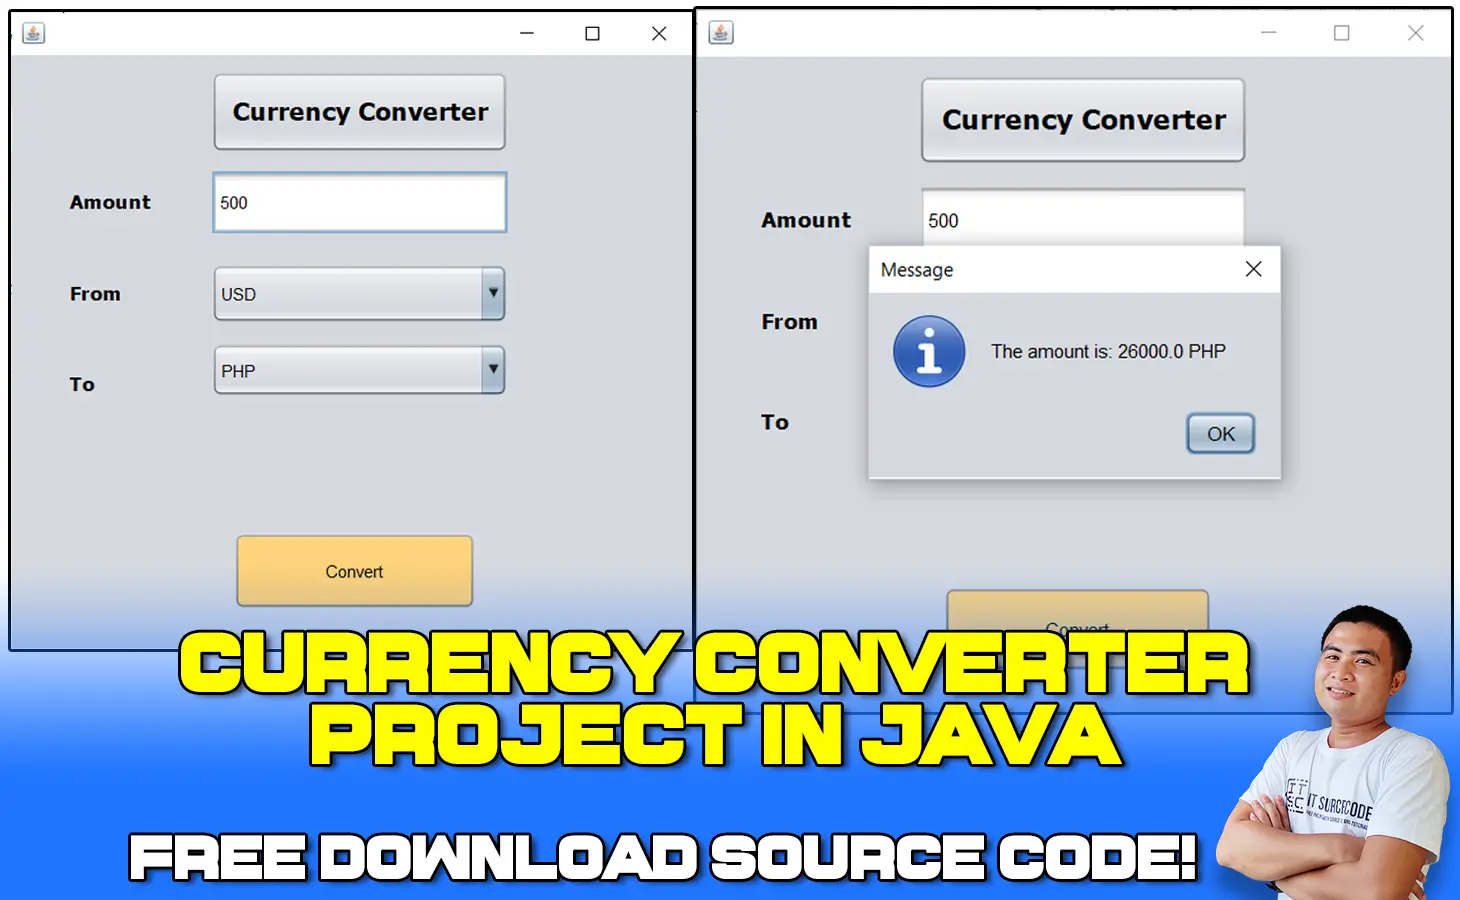 Currency Converter Project in Java with Source Code